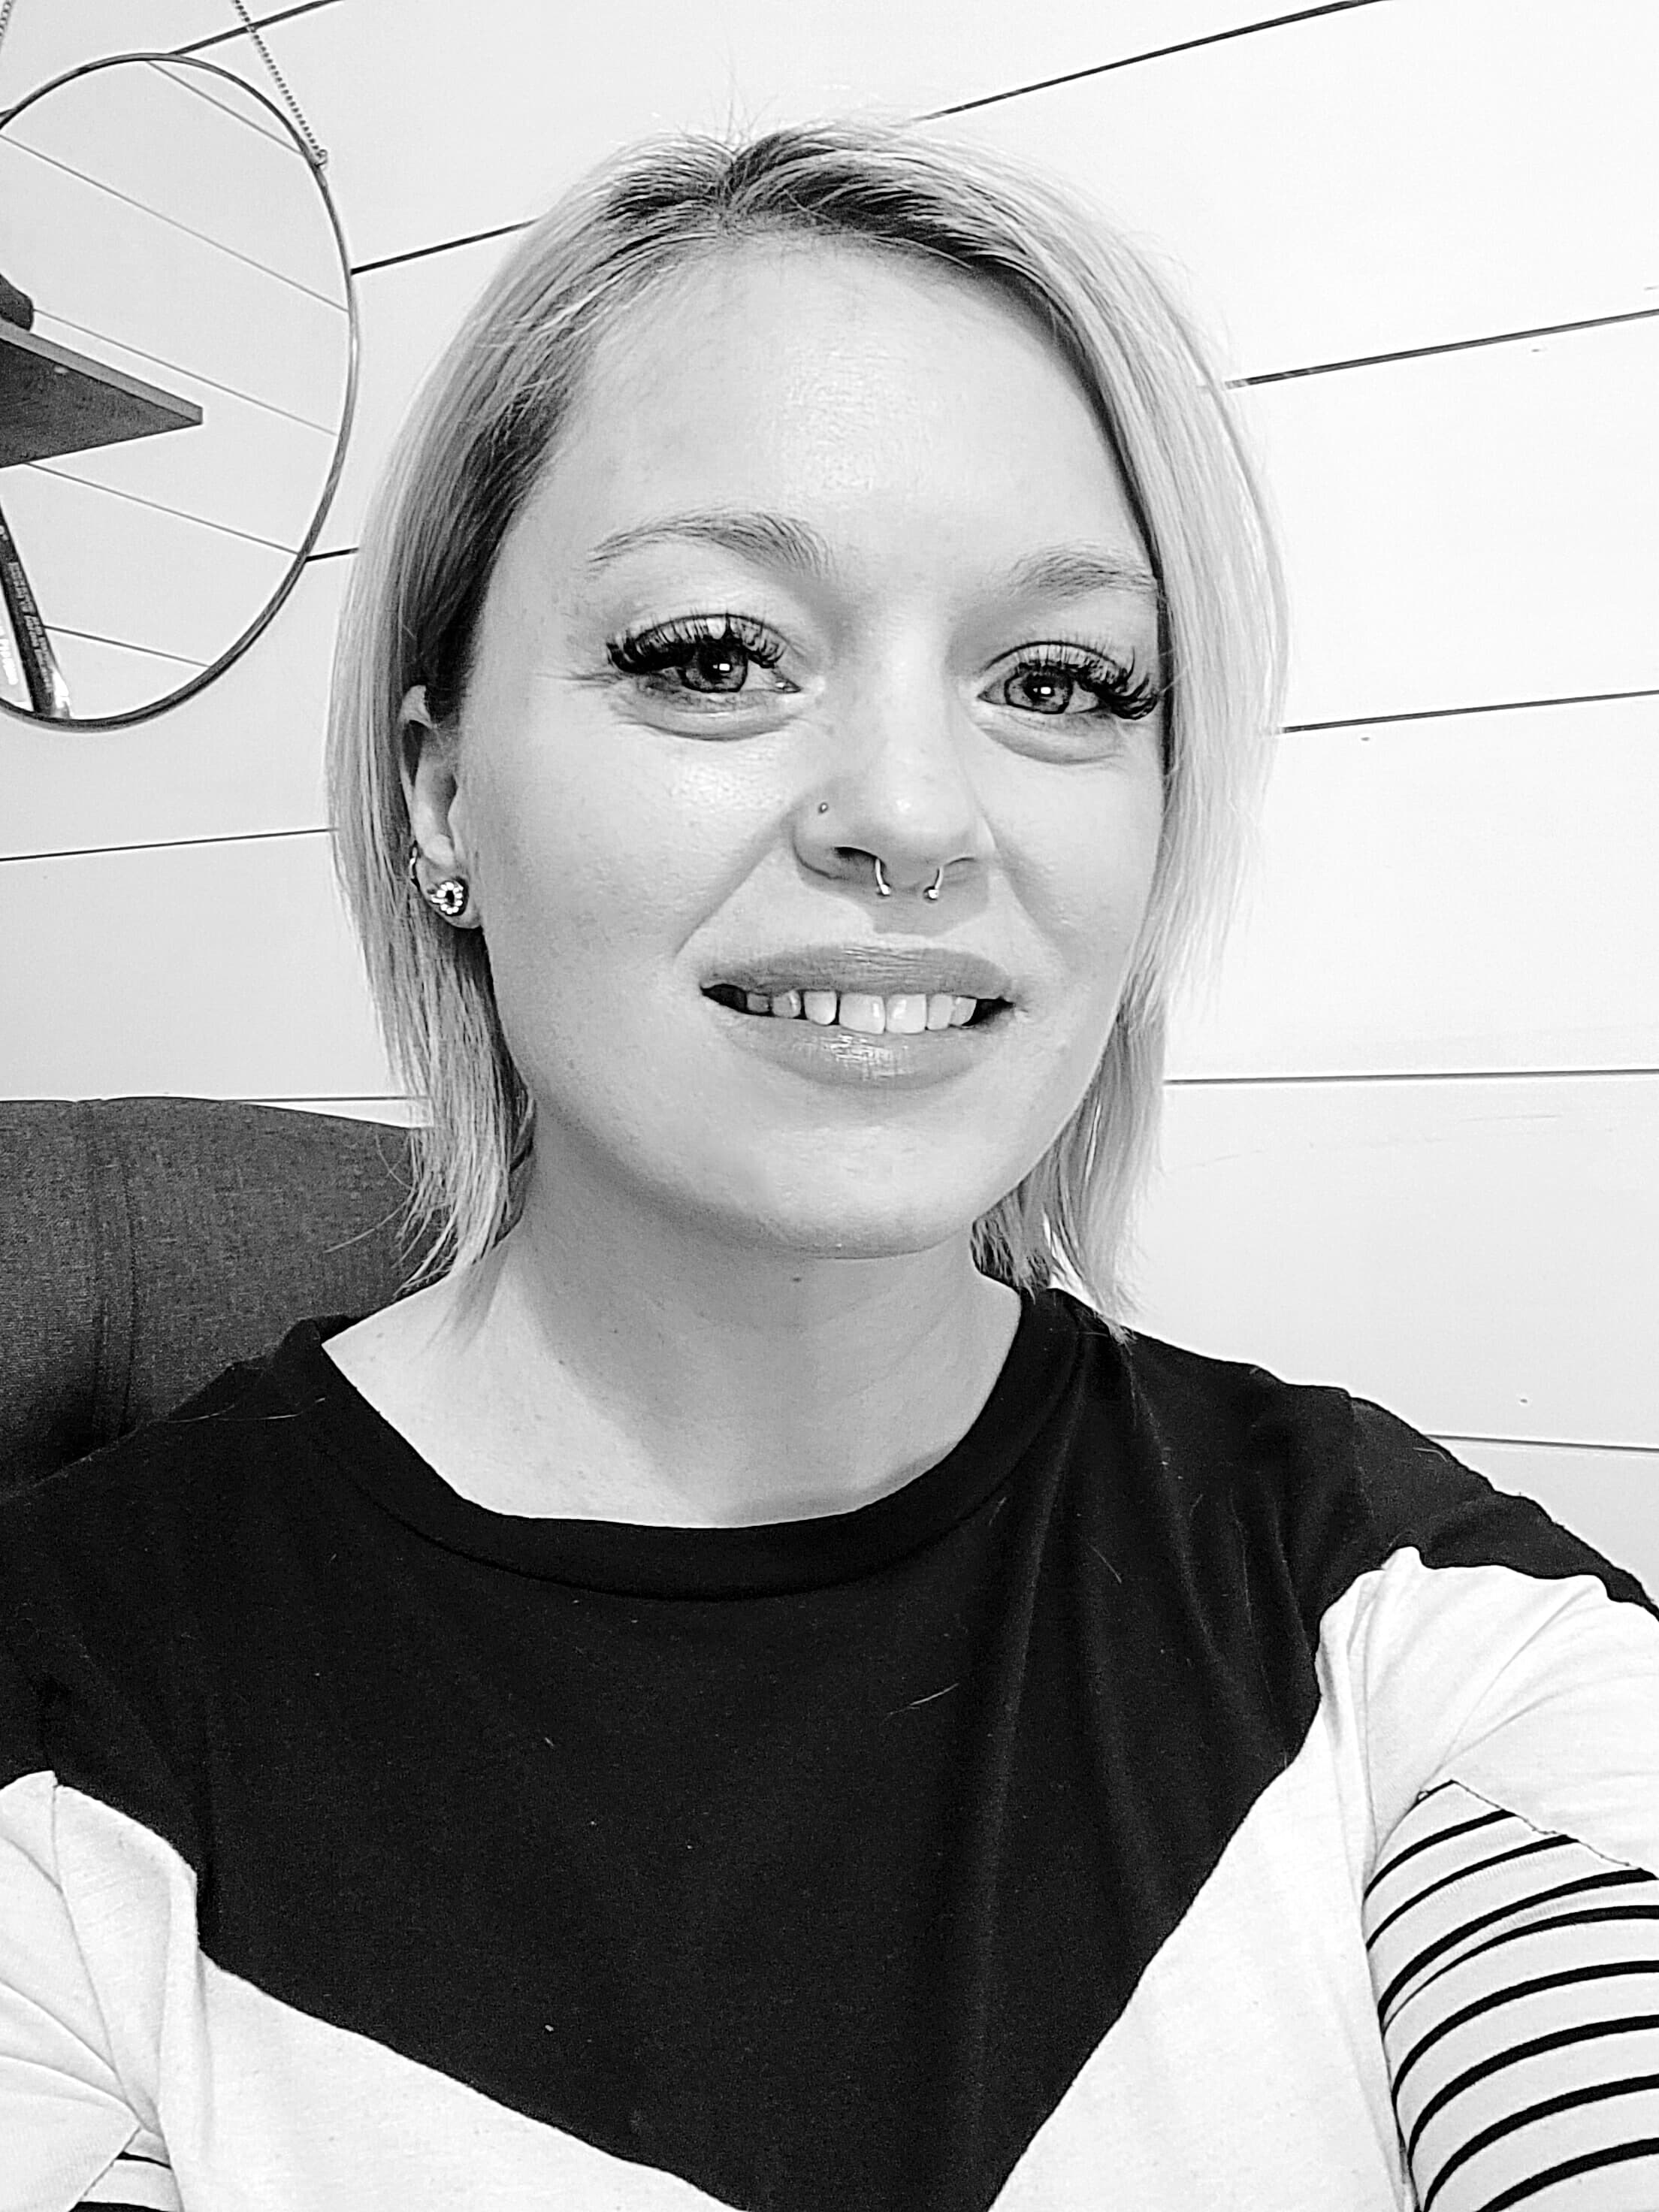 This black and white photo shows Aundria, a twenty something female with short light-colored hair. She is wearing a dark colored shirt and smiling.